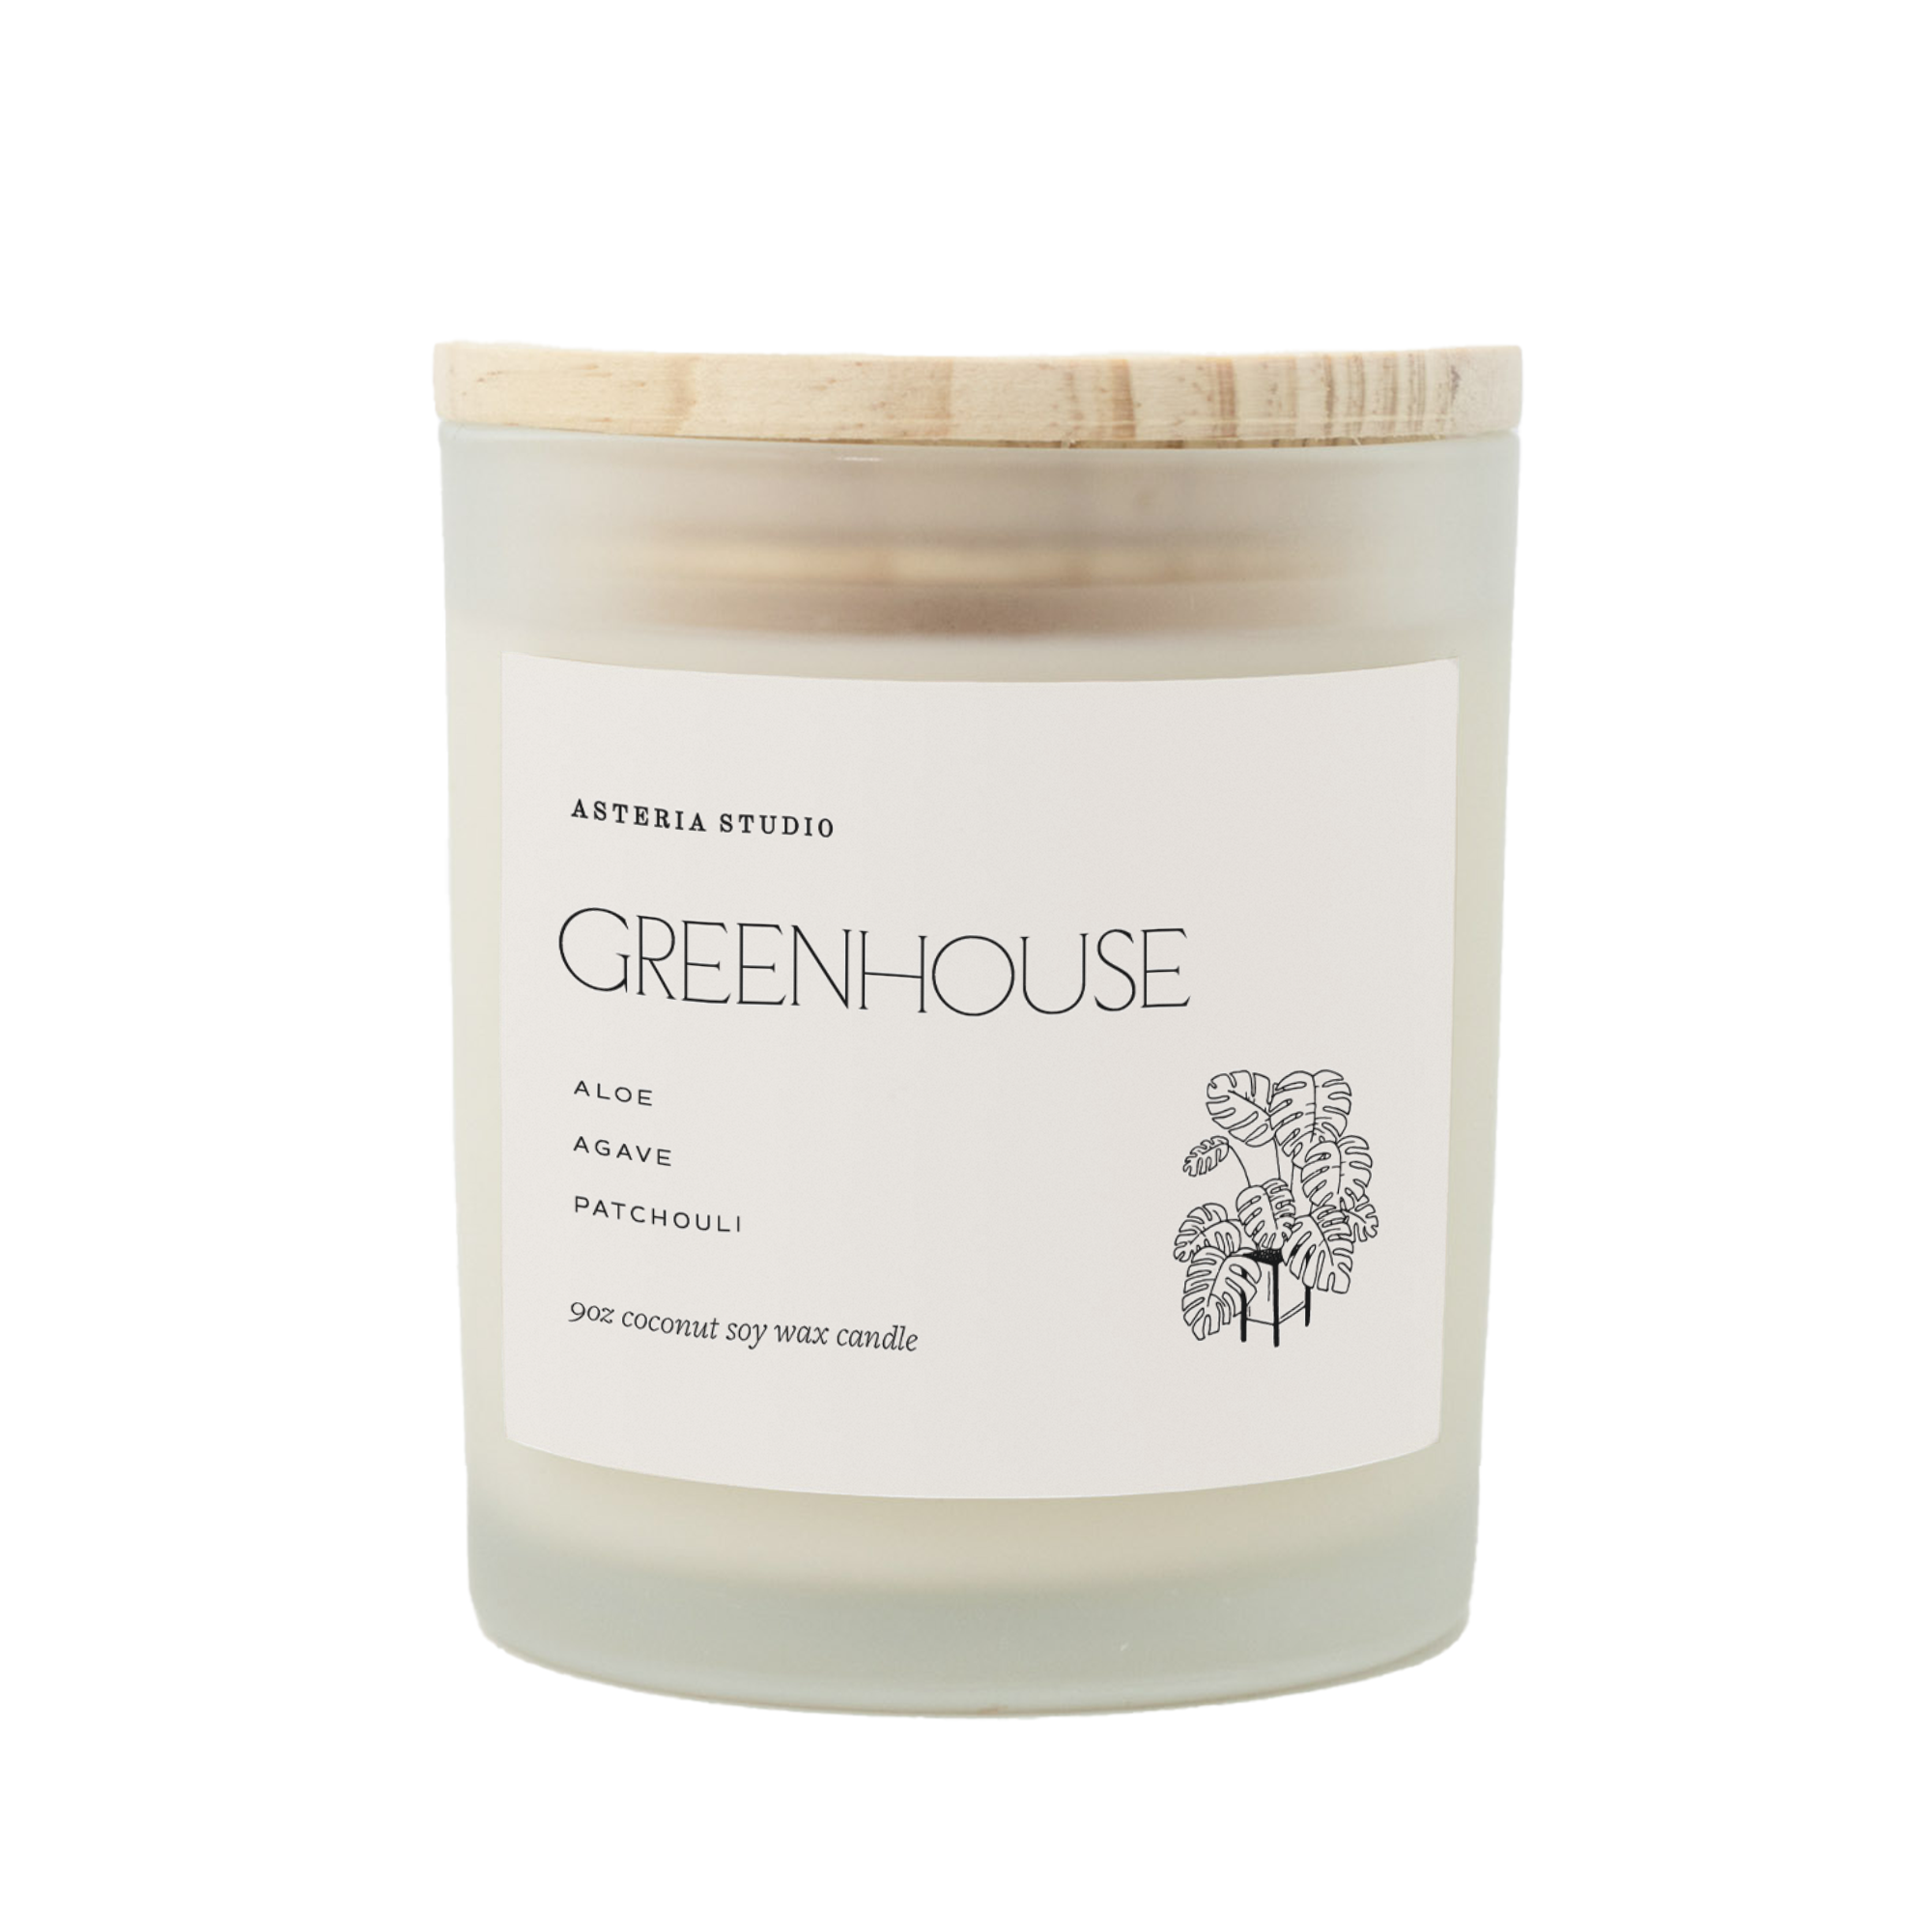 Greenhouse Candle